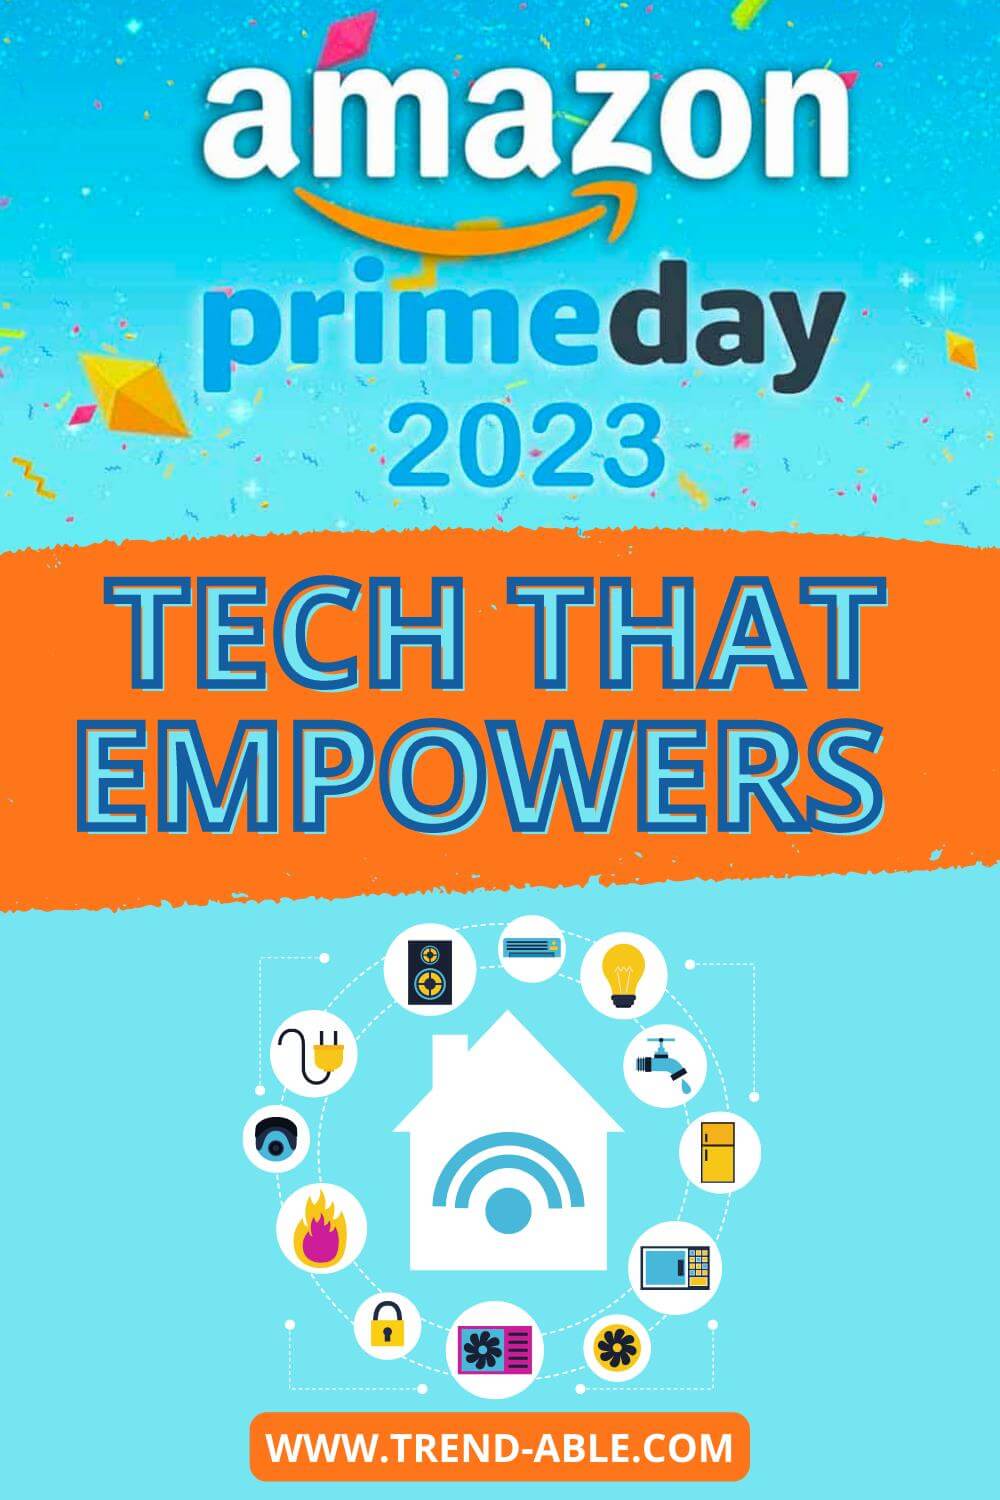 Amazon Prime Day 2023 Tech That Empowers